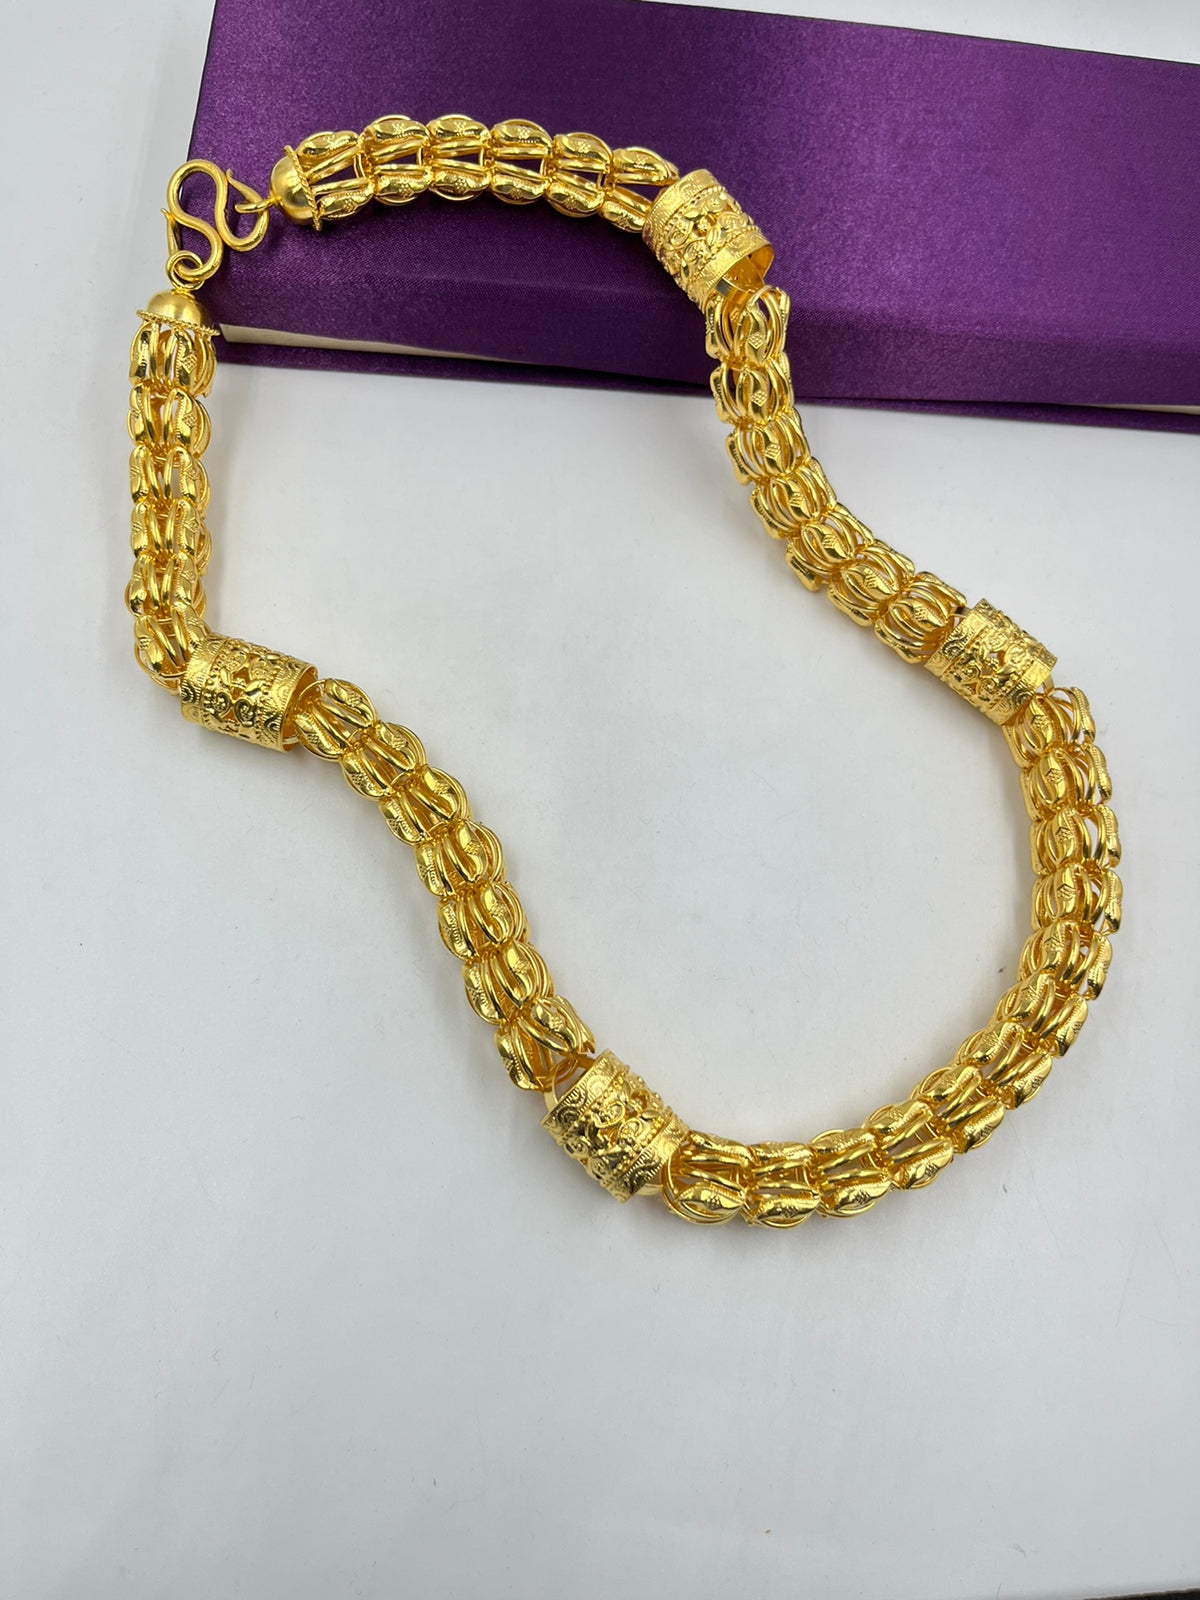 Buy Gold Bracelets For Men In Online India With Latest Designs |